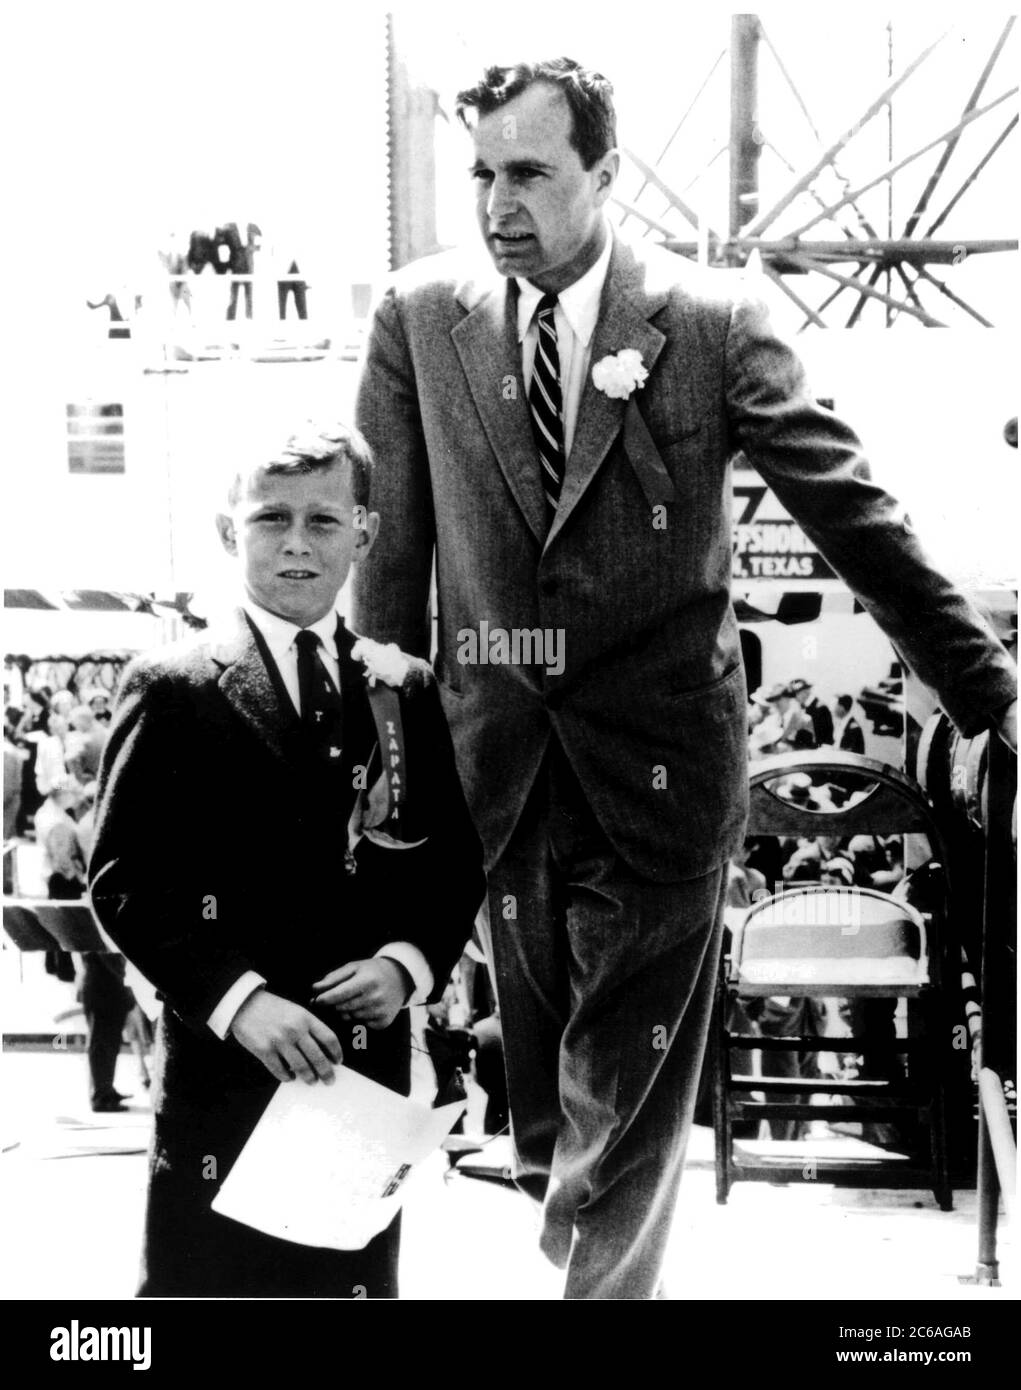 H049-02 March 20, 1956: Nine-year-old  George W. Bush with his father, George H.W. Bush, at the commissioning ceremonies for the Scorpion off-shore drilling platform. The elder Bush was president of Zapata Oil, which ordered the ground-breaking drilling rig. ©George Bush Presidential Library Stock Photo